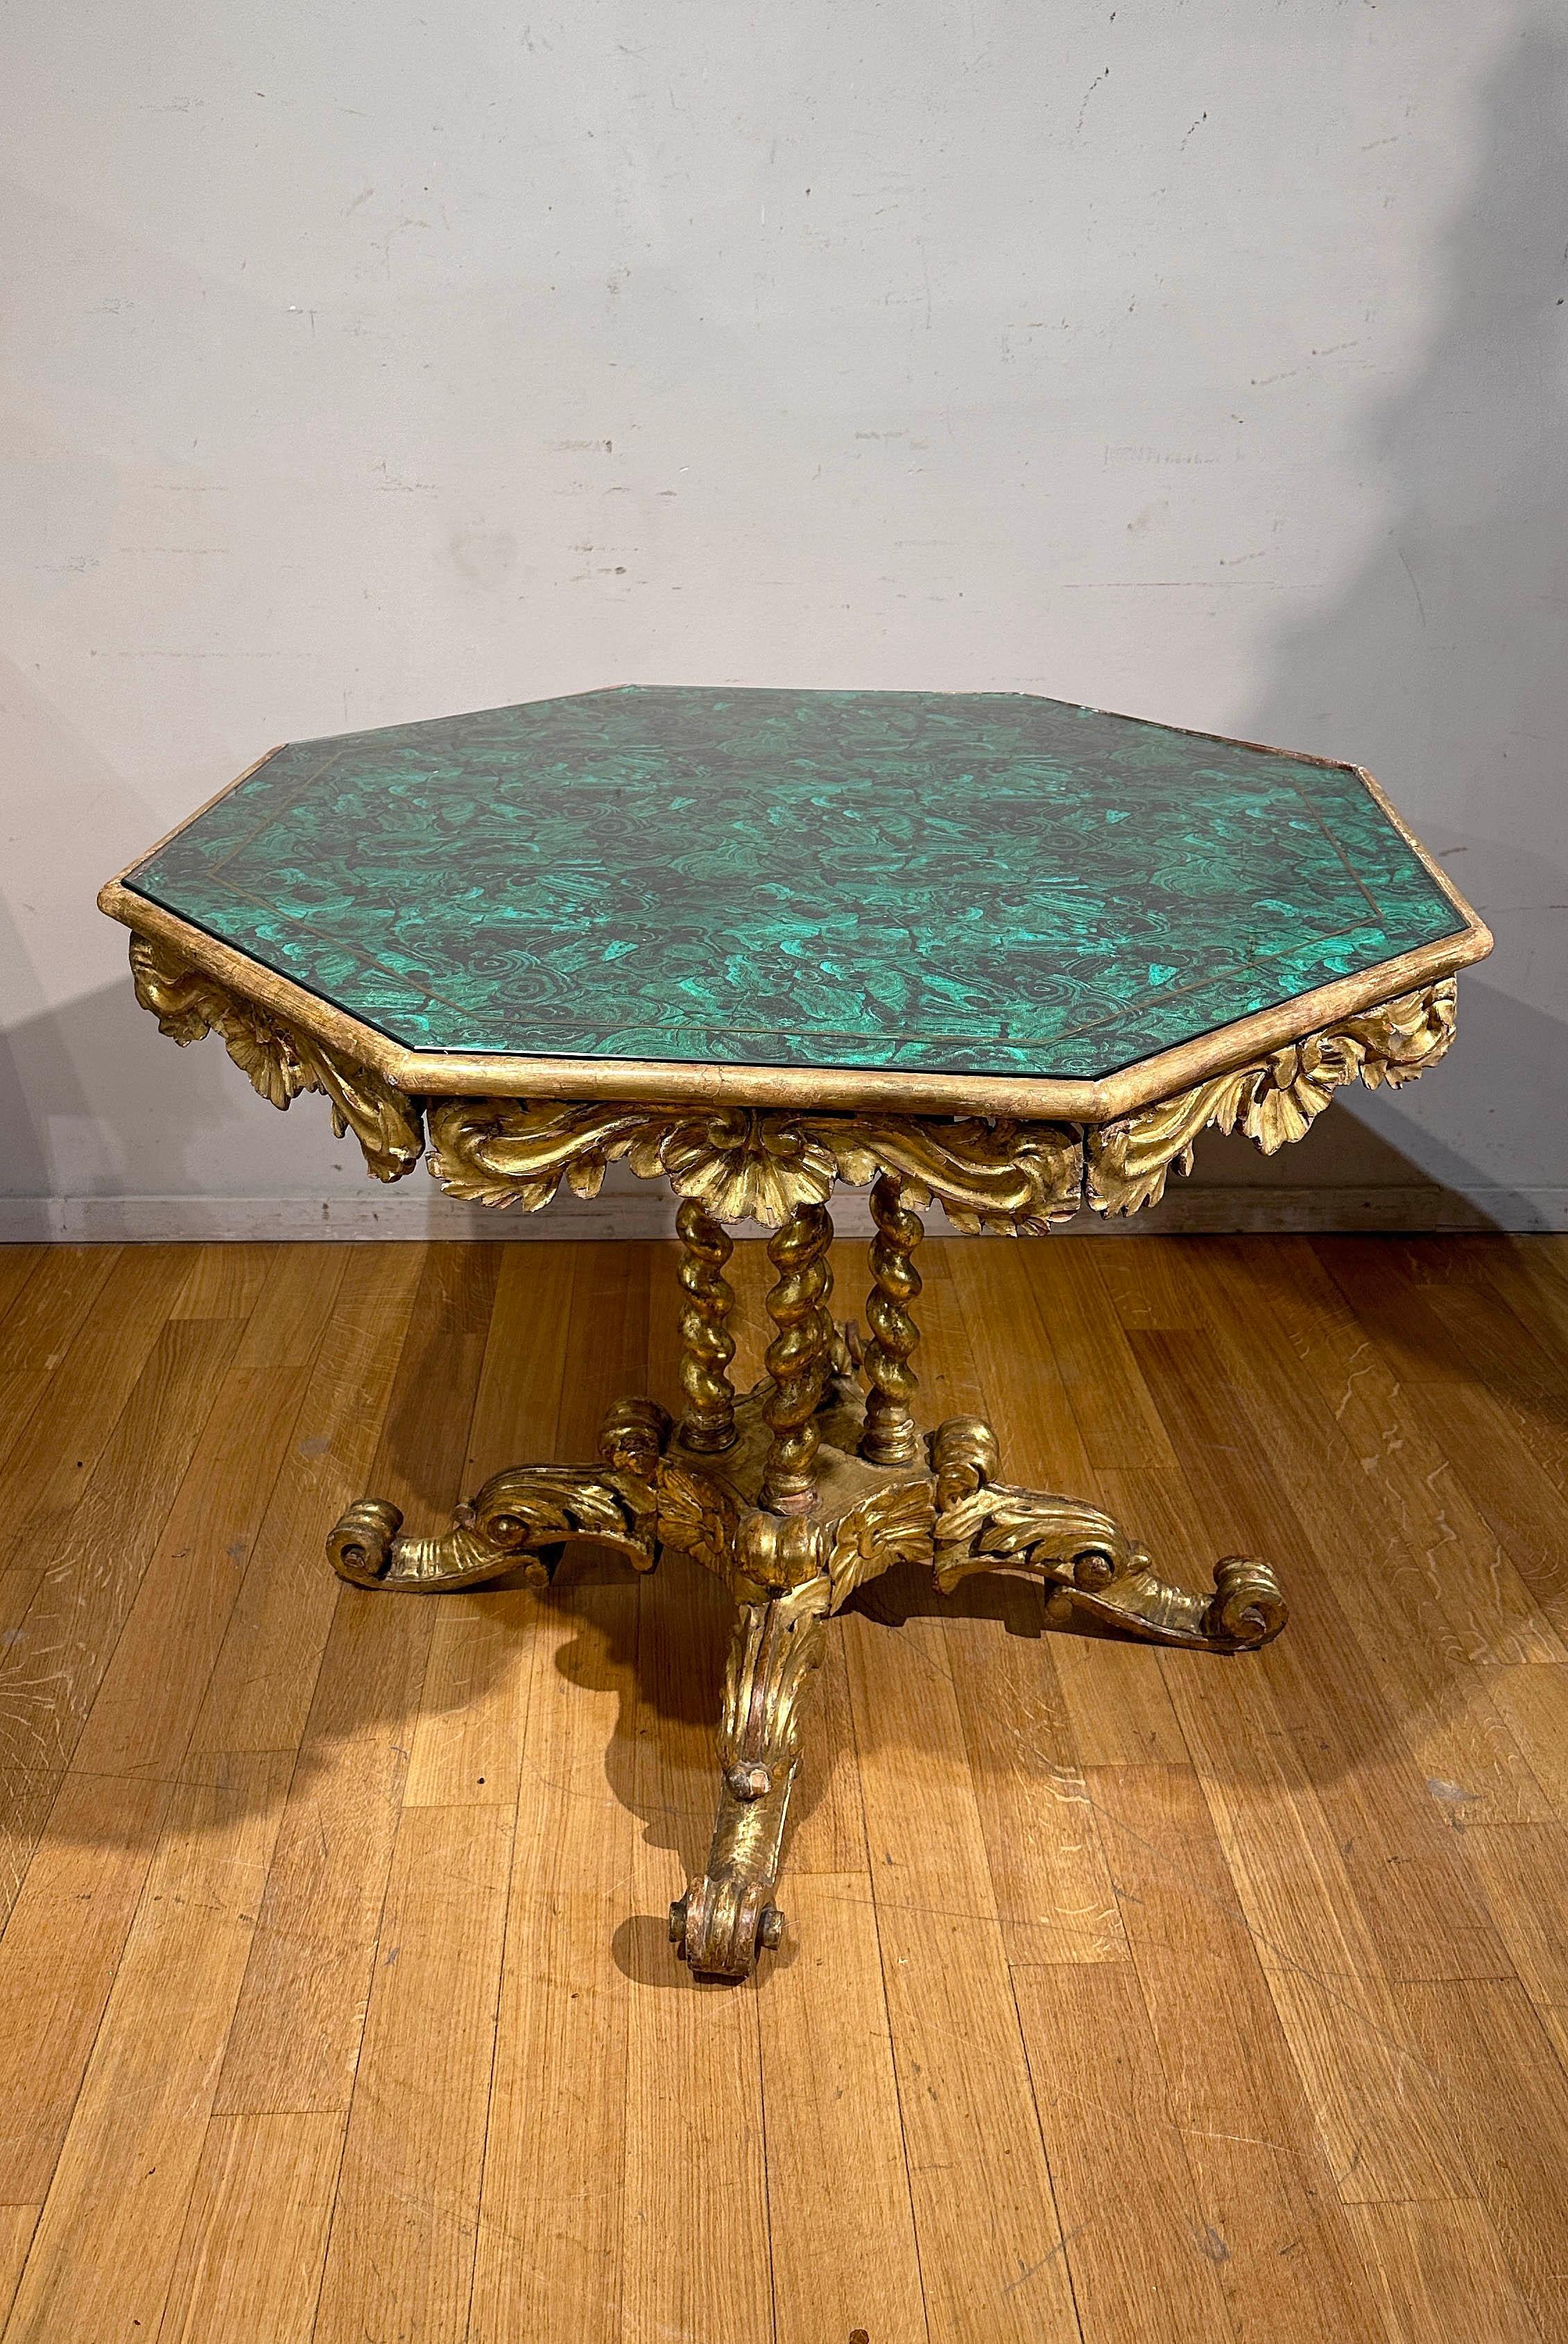 EARLY 19th CENTURY GILDED WOOD TABLE WITH SIMILAR MALACHITE FABRIC (Geschnitzt) im Angebot